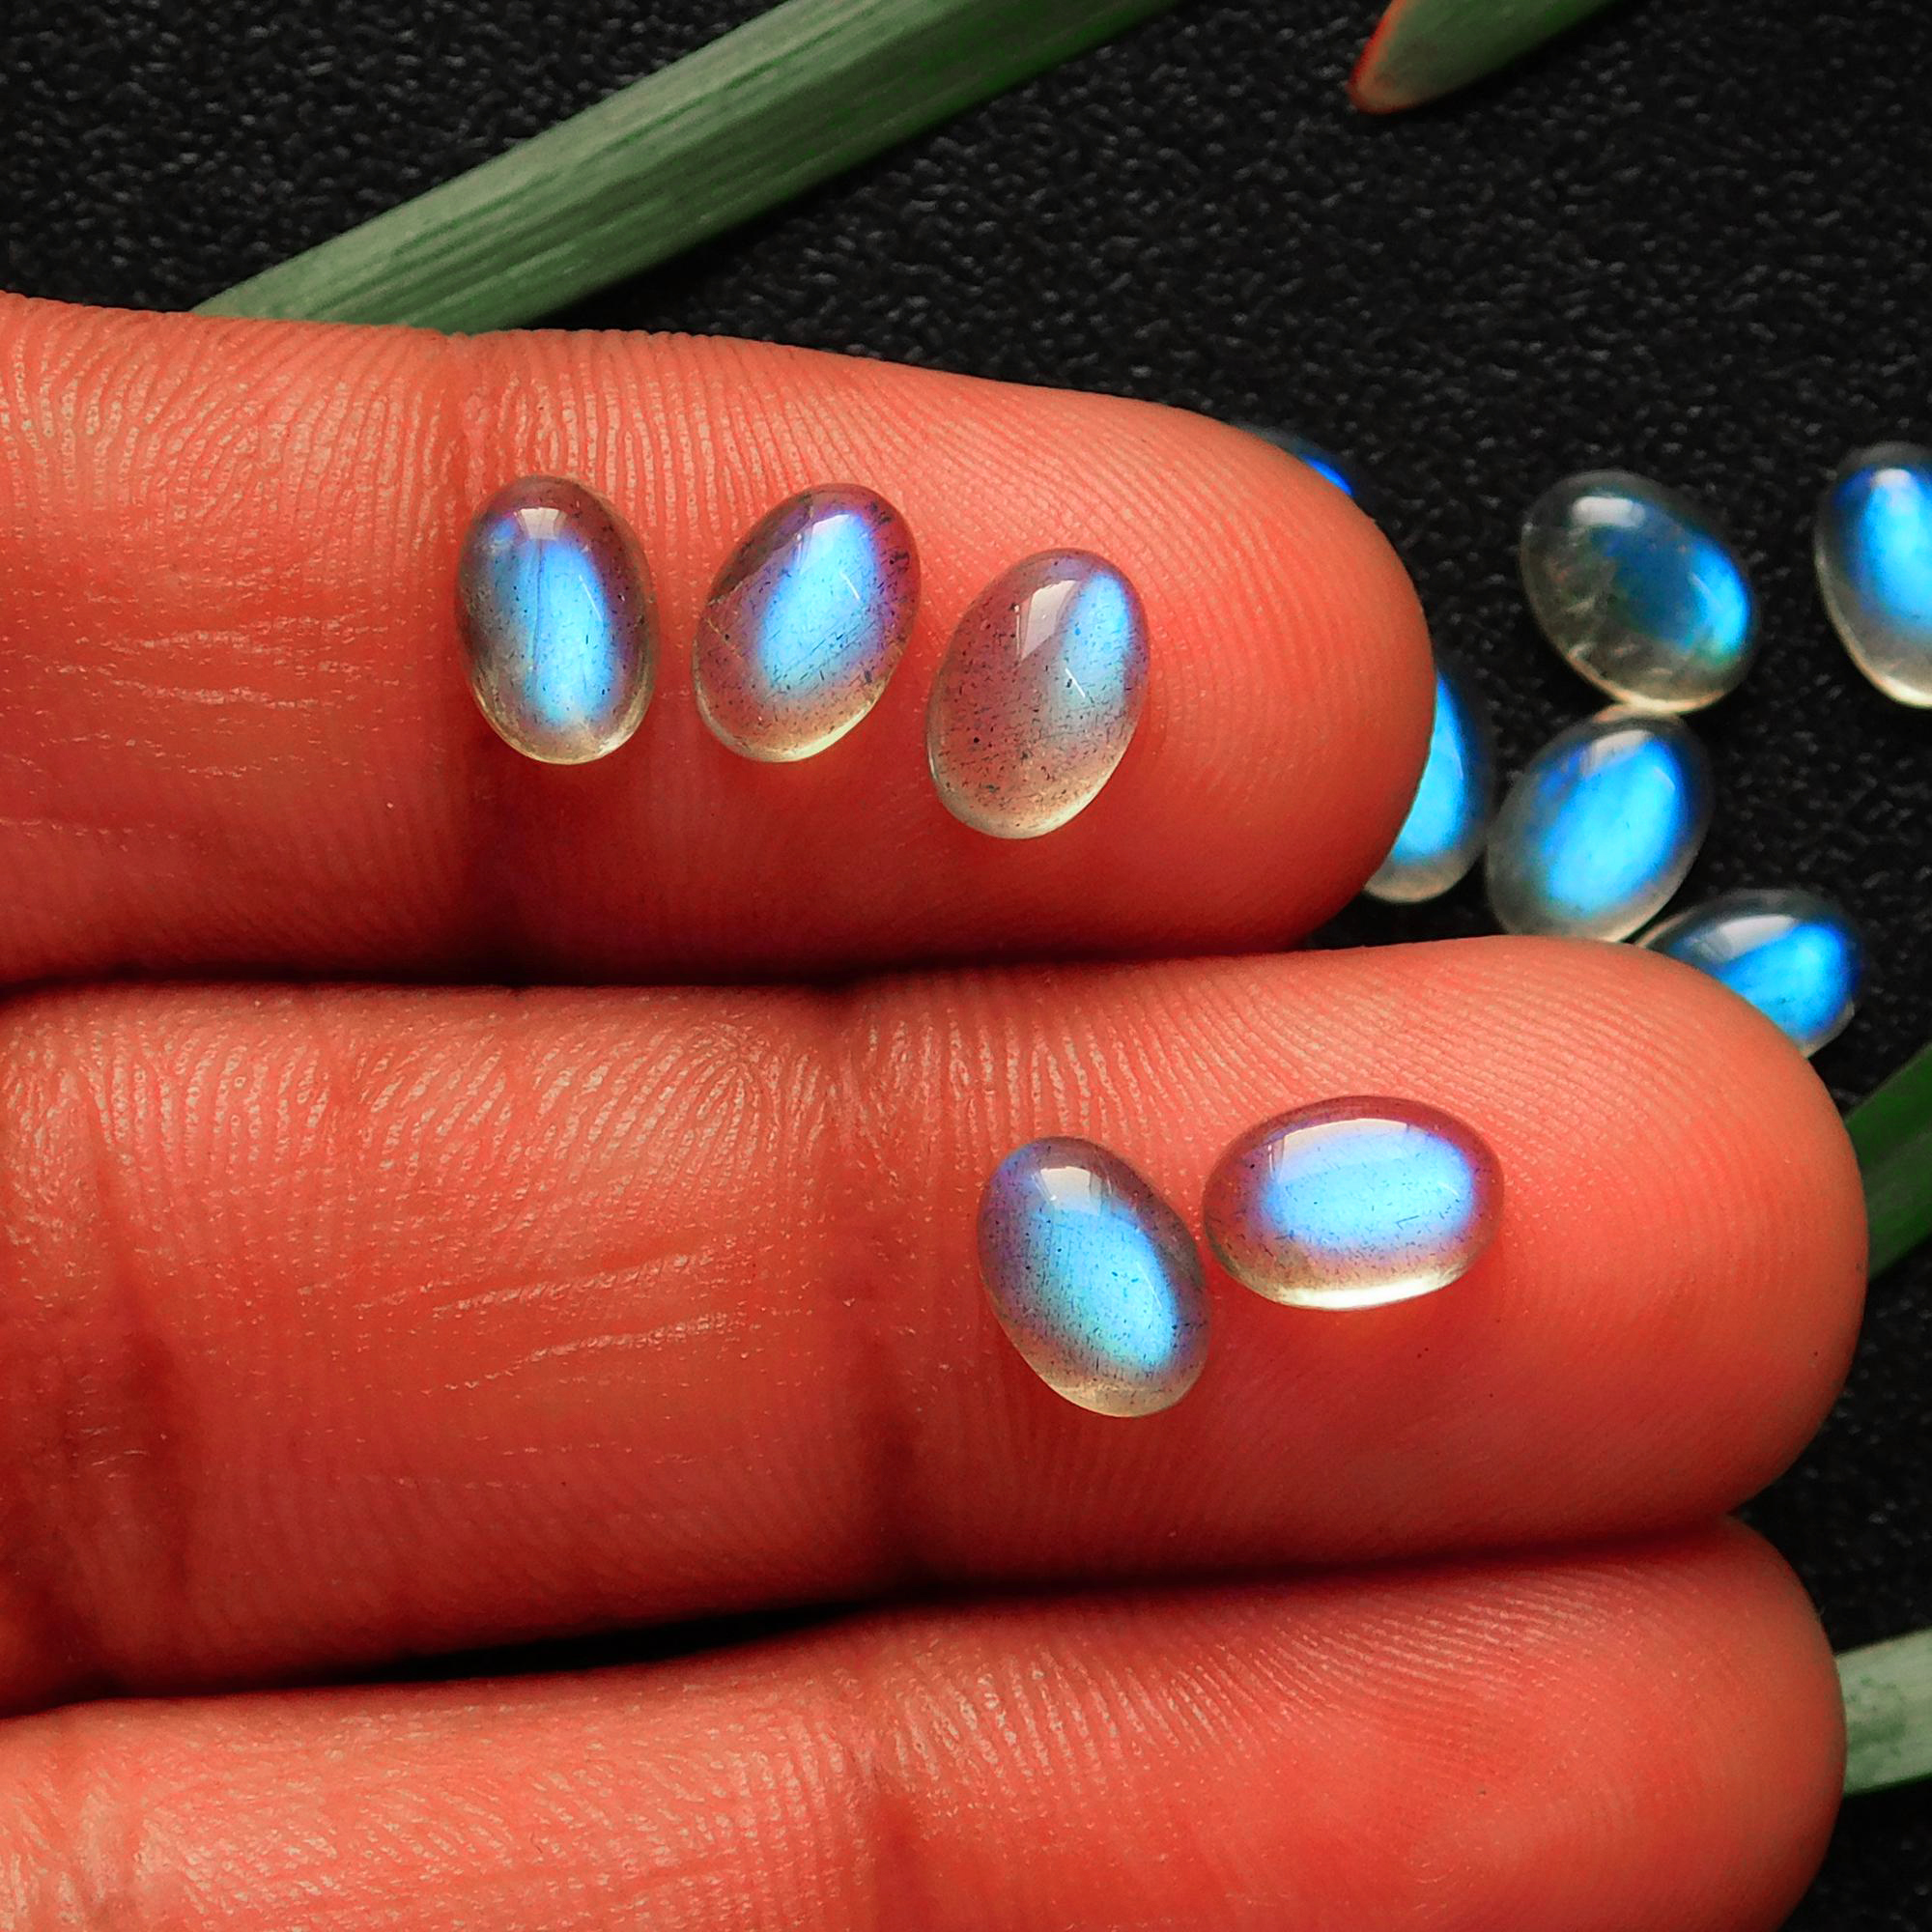 15 Pcs 13.85 Cts Natural Celibrated Labradorite Oval Cabochons Loose Gemstone Wholesale Lot Size 7x5mm